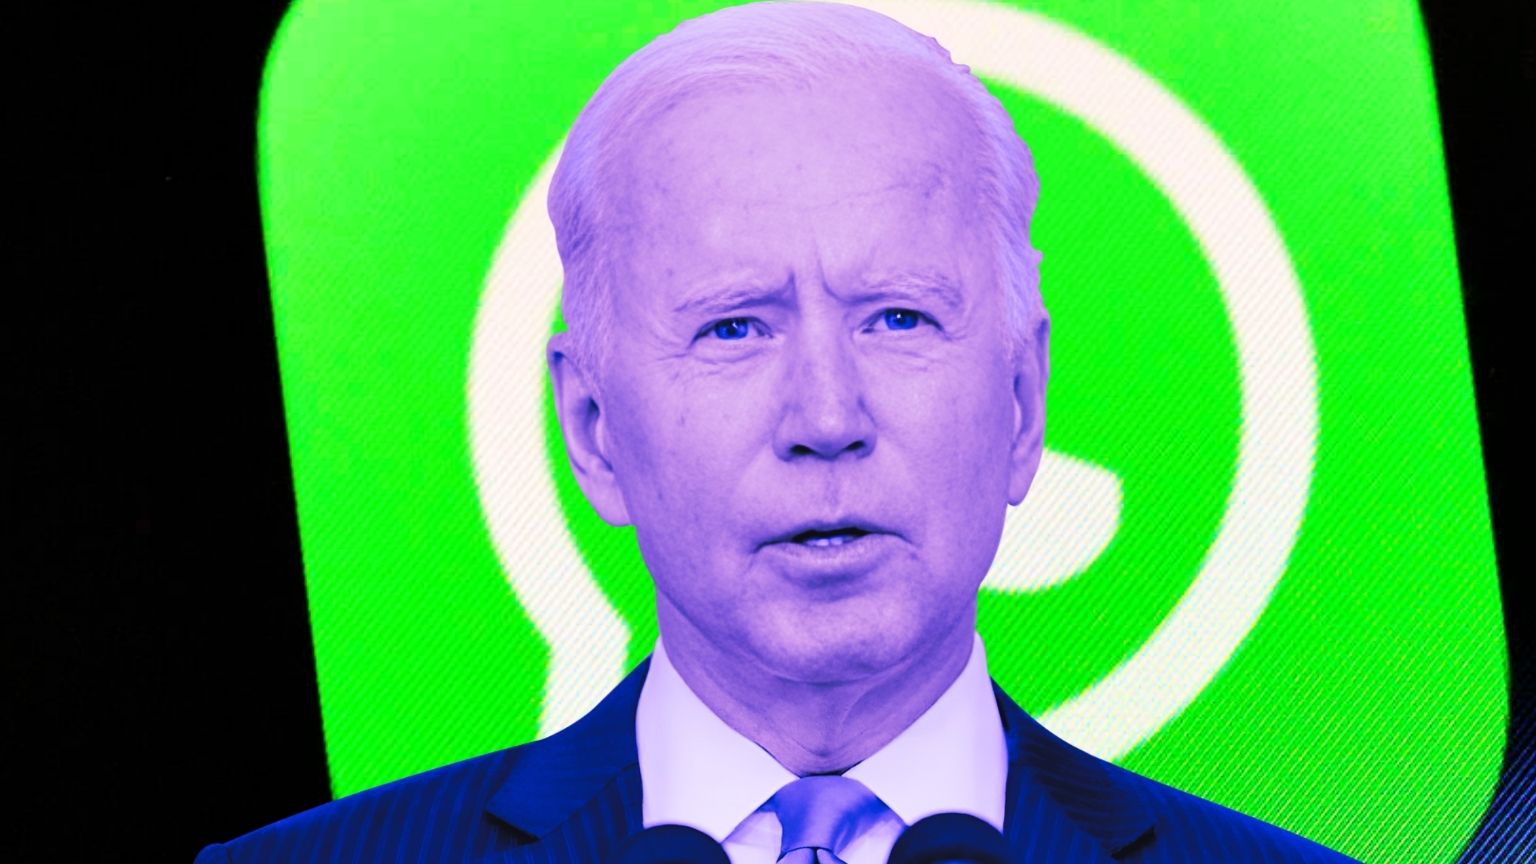 Biden Administration demanded crackdown on “vaccine-skeptical” WhatsApp chats